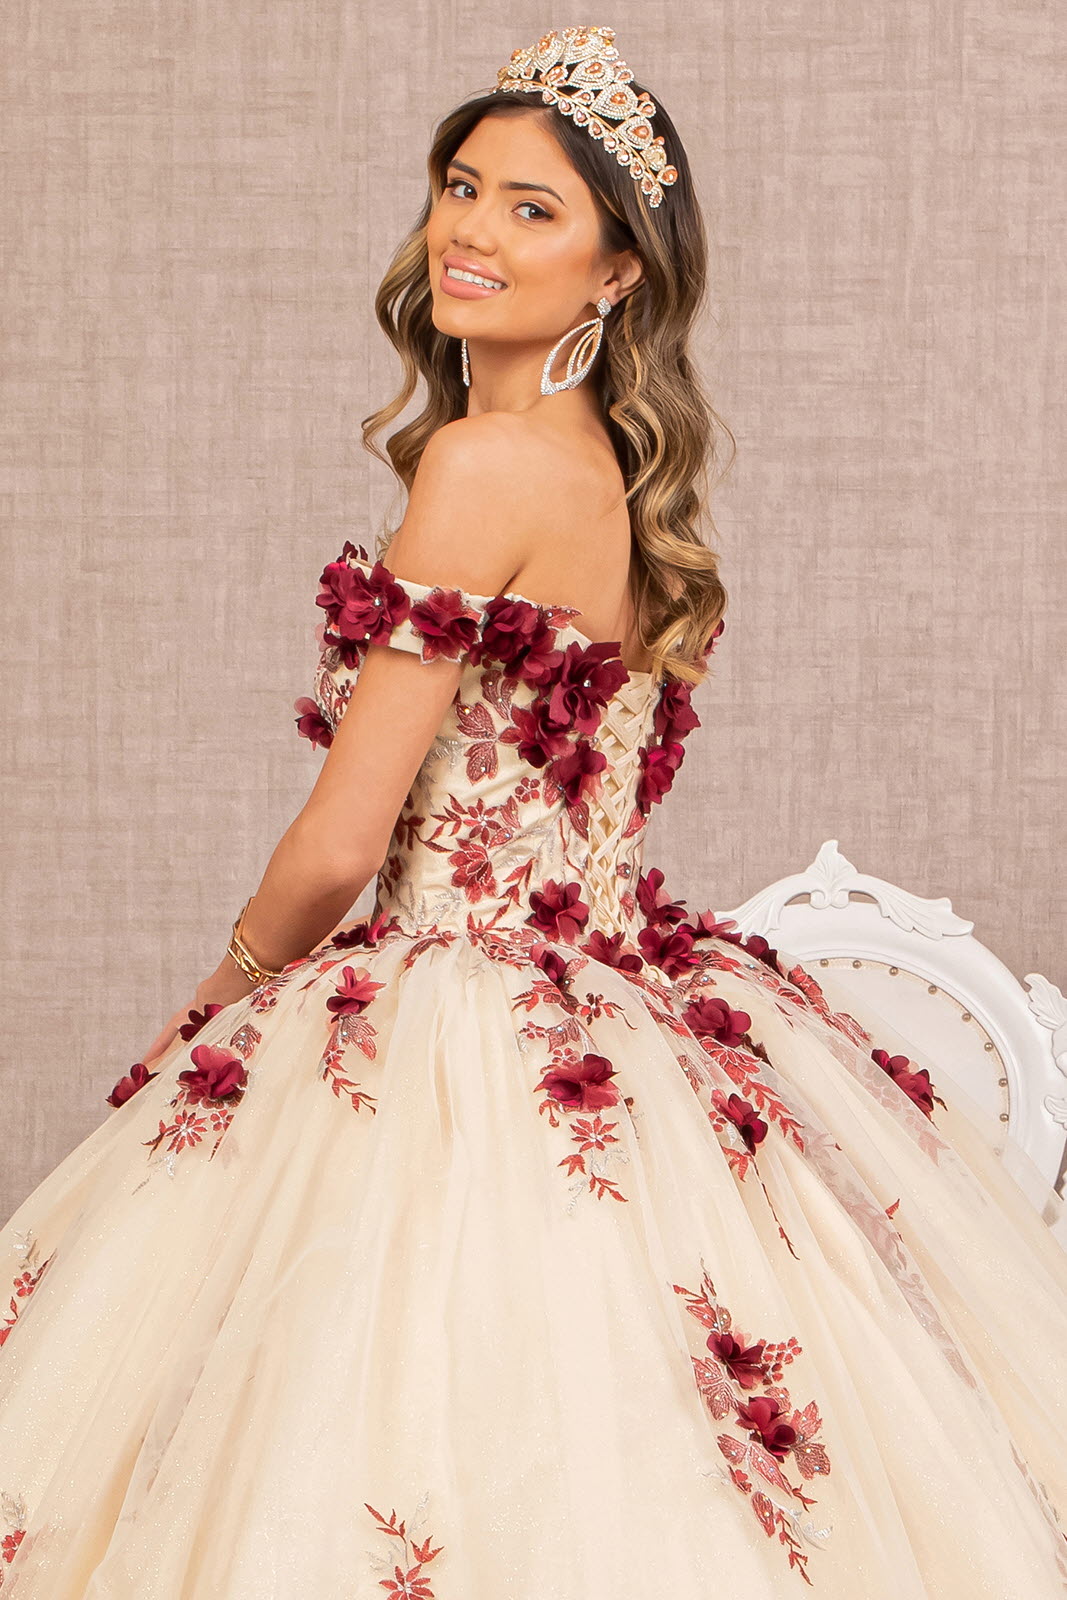 3D Flower Embroidery Off Shoulder Mesh Quinceanera Gown GLGL3105-QUINCEANERA-smcfashion.com